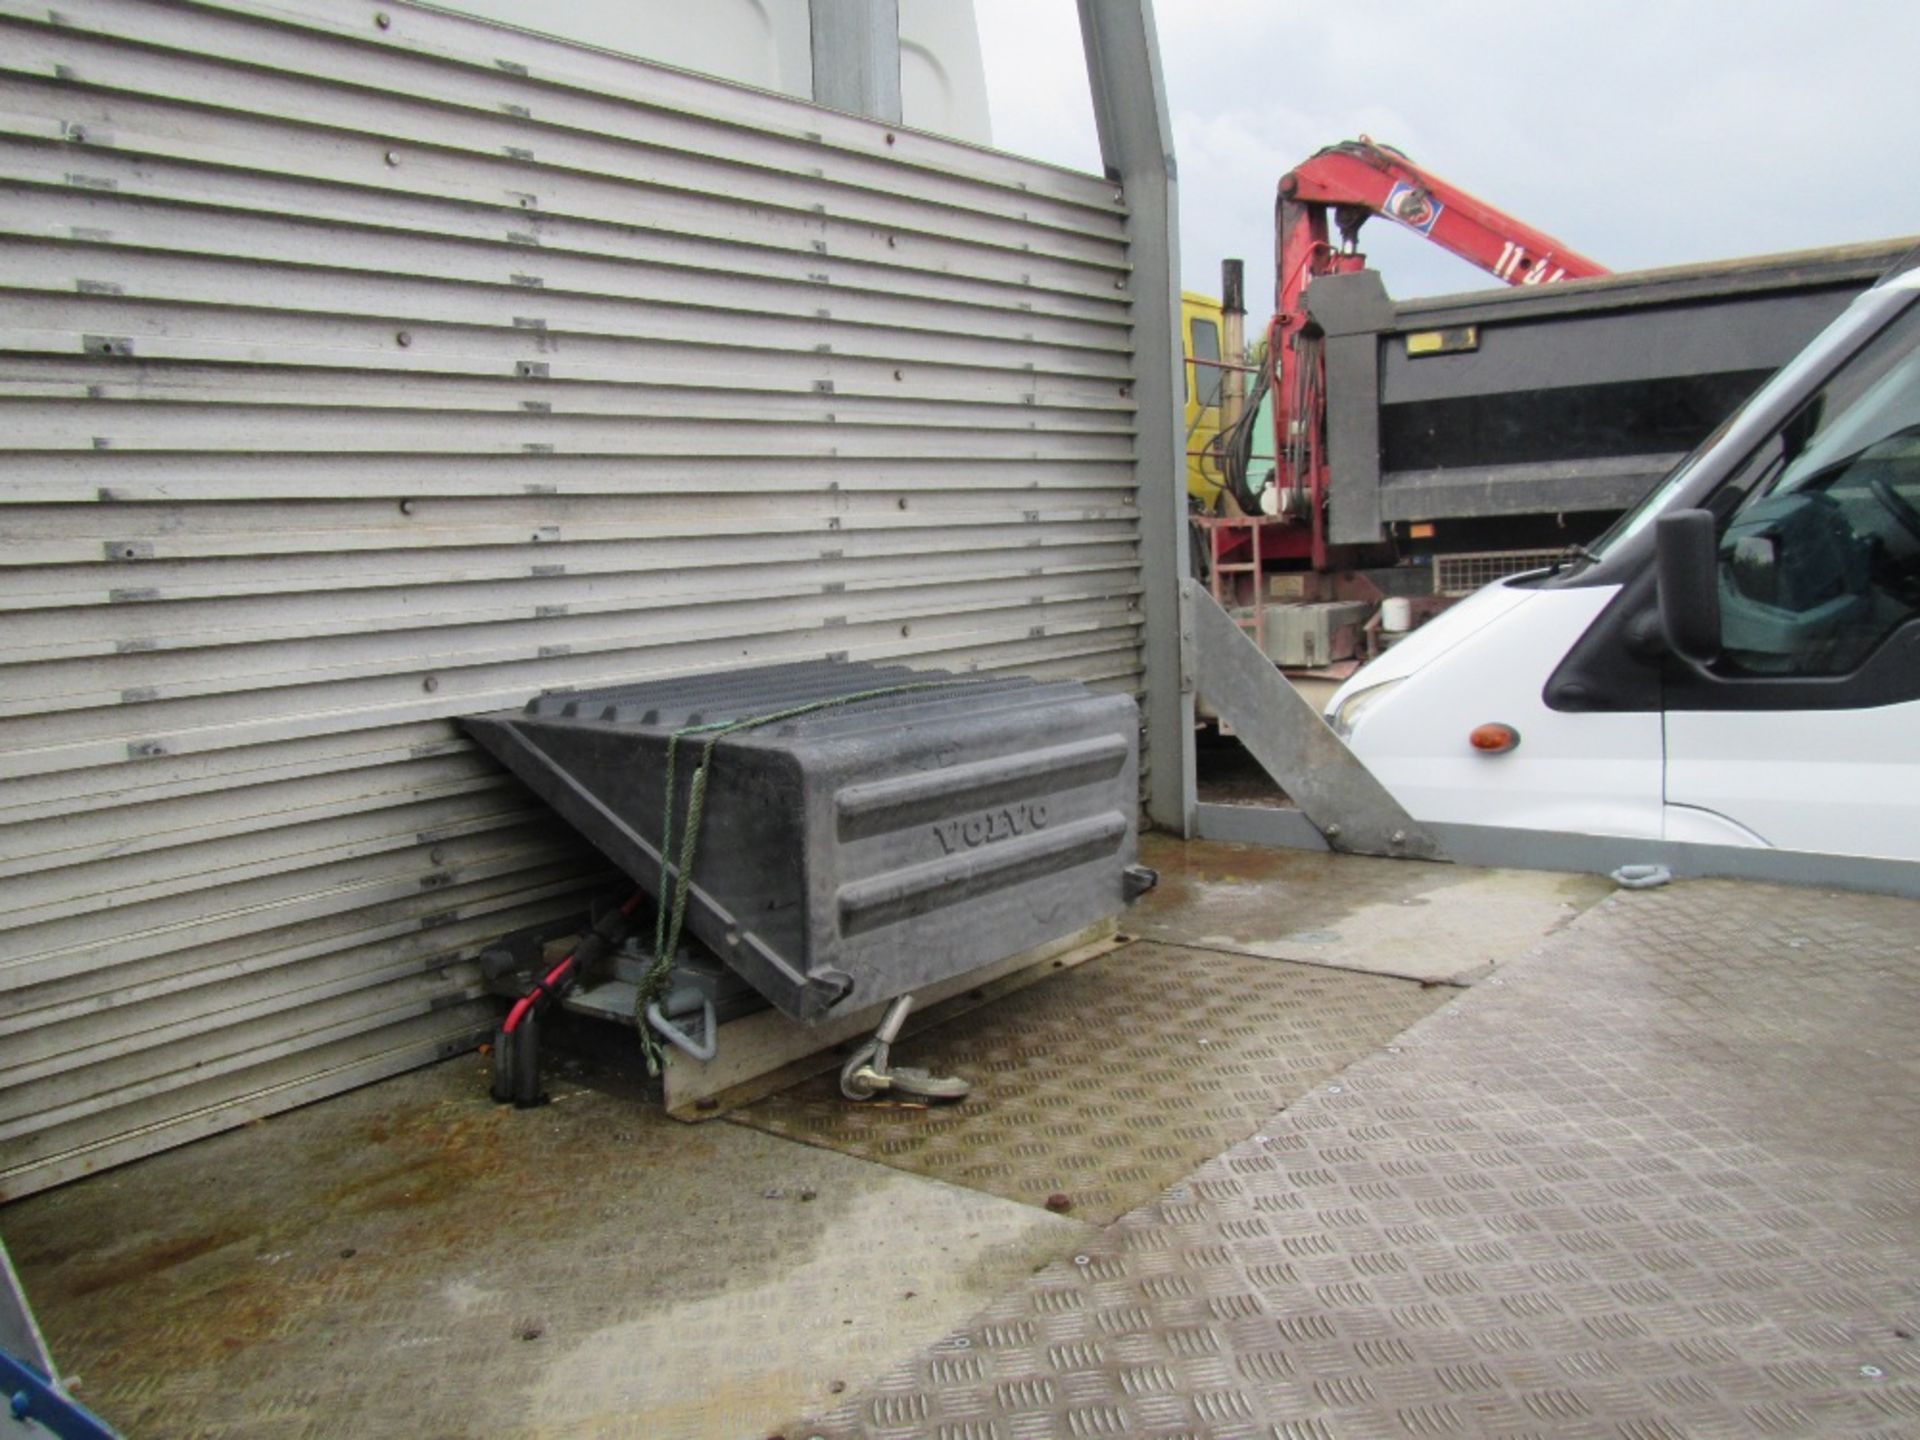 2006 Renault Midlum 180 22ft Plant Beavertail with Sleeper Cab, Alloy Ramps, Winch. Reg Docs will be - Image 6 of 6